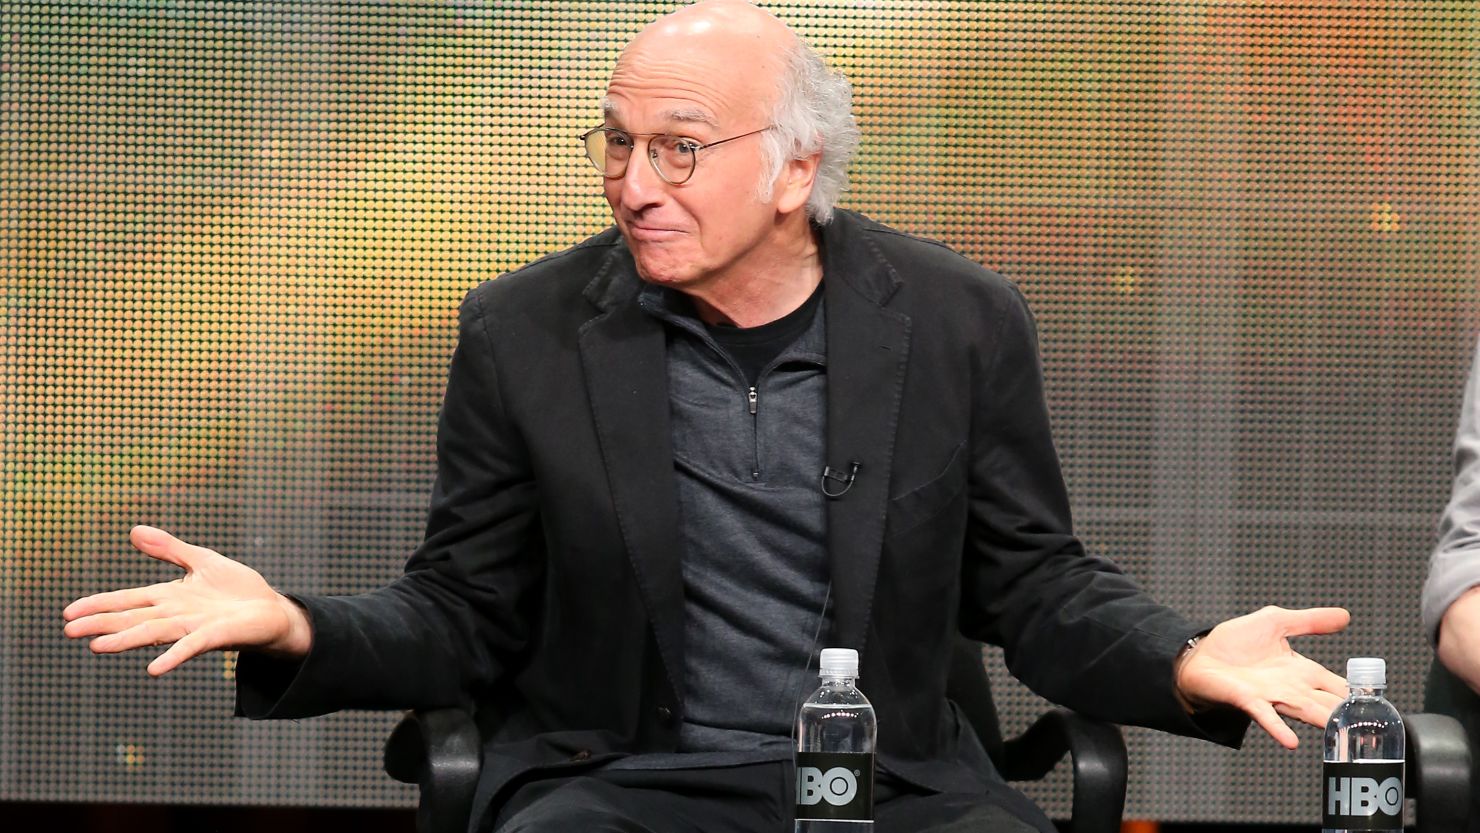 Larry David speaks onstage during the 2013 Summer Television Critics Association tour.